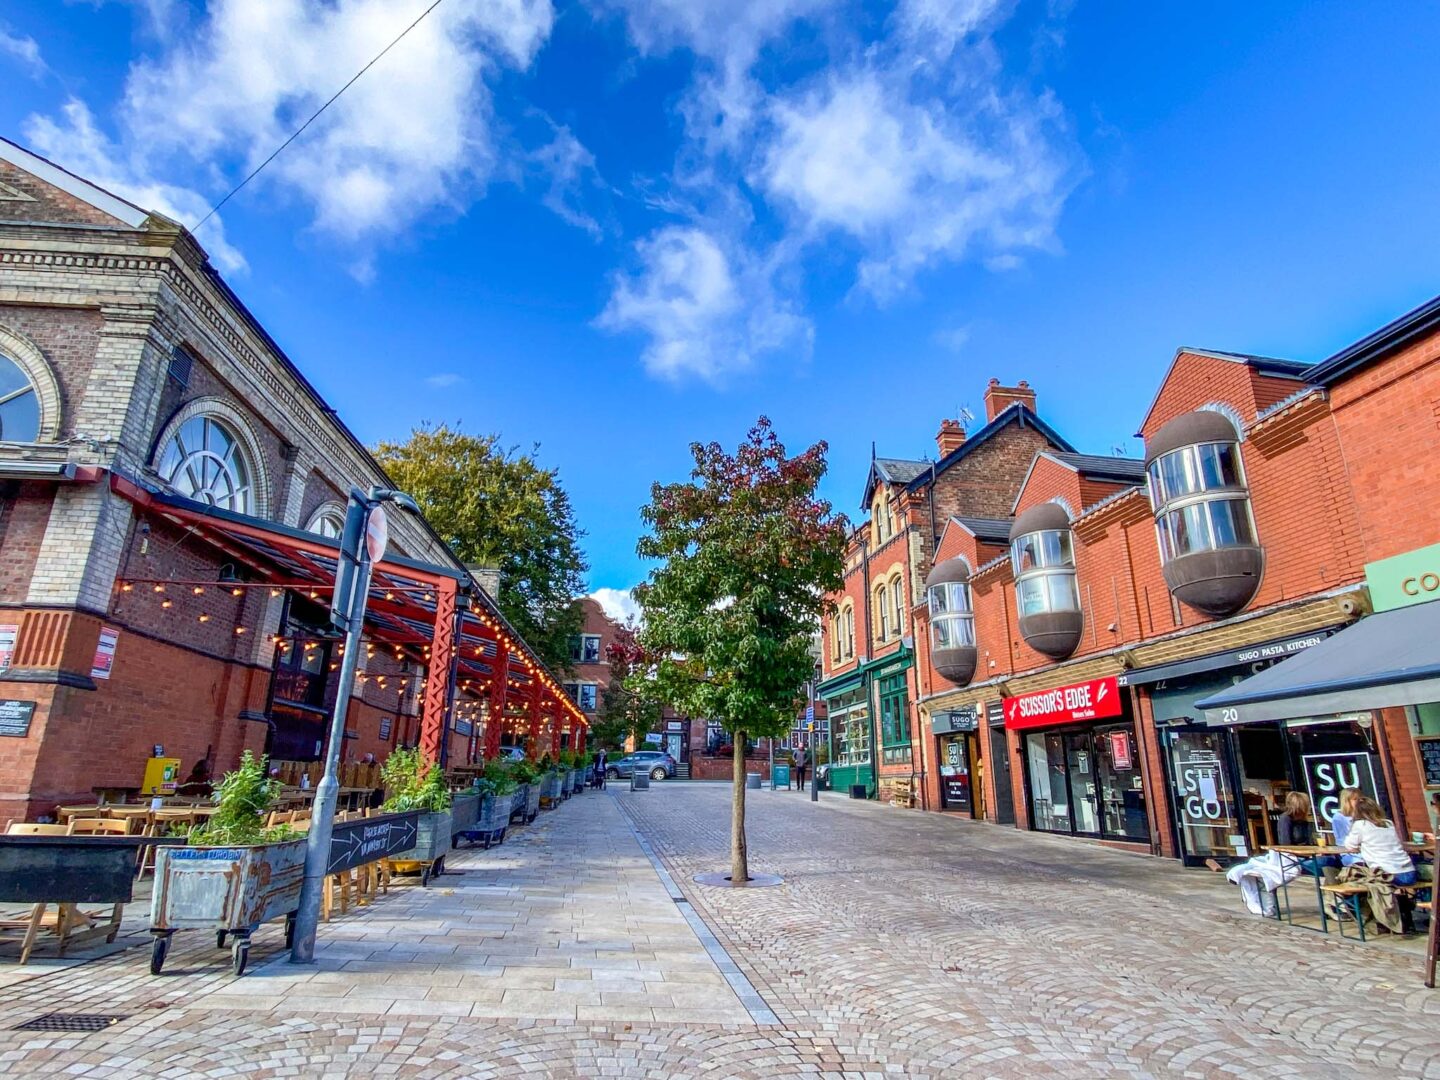 Things to do in Altrincham, Altrincham market and high street